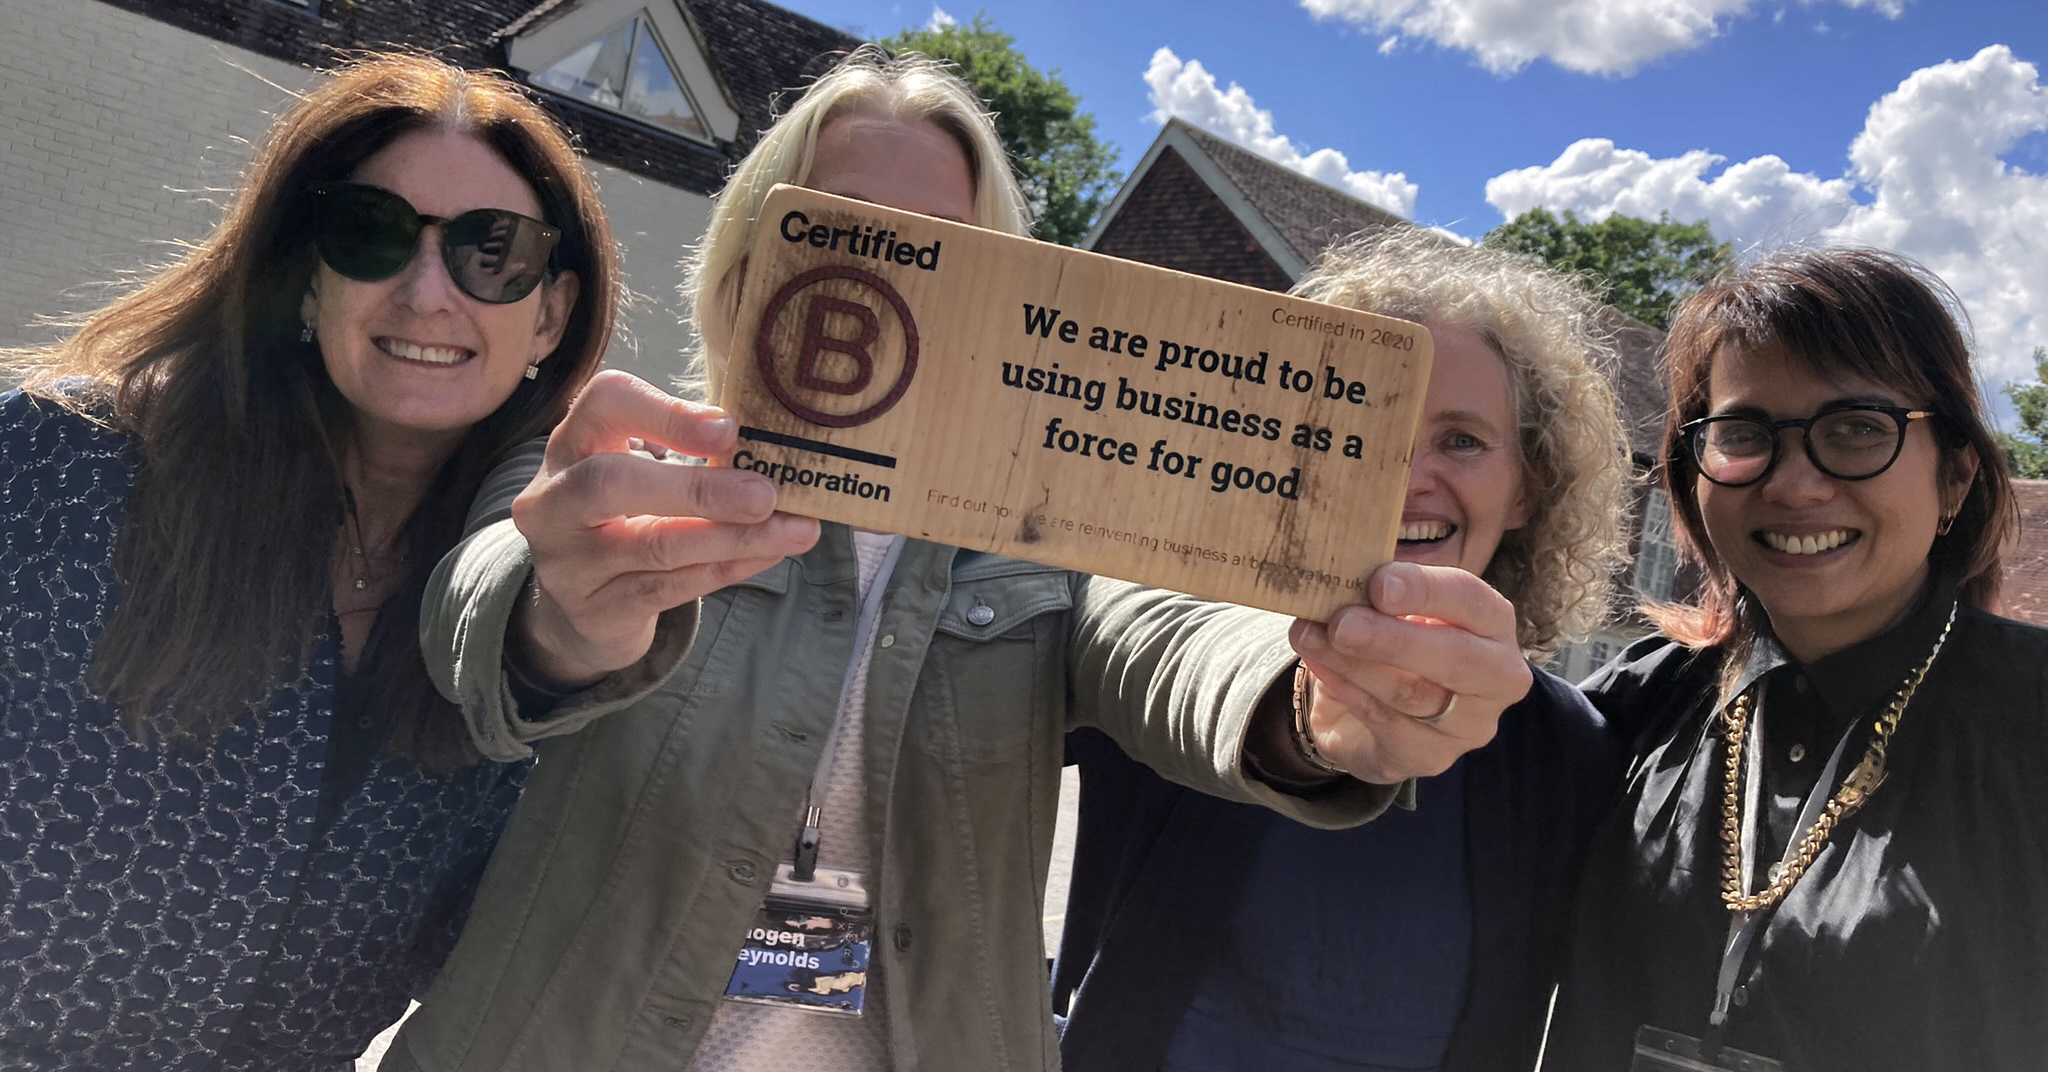 The Oxford SM team holding the wooden B Corporation certification whilst smiling